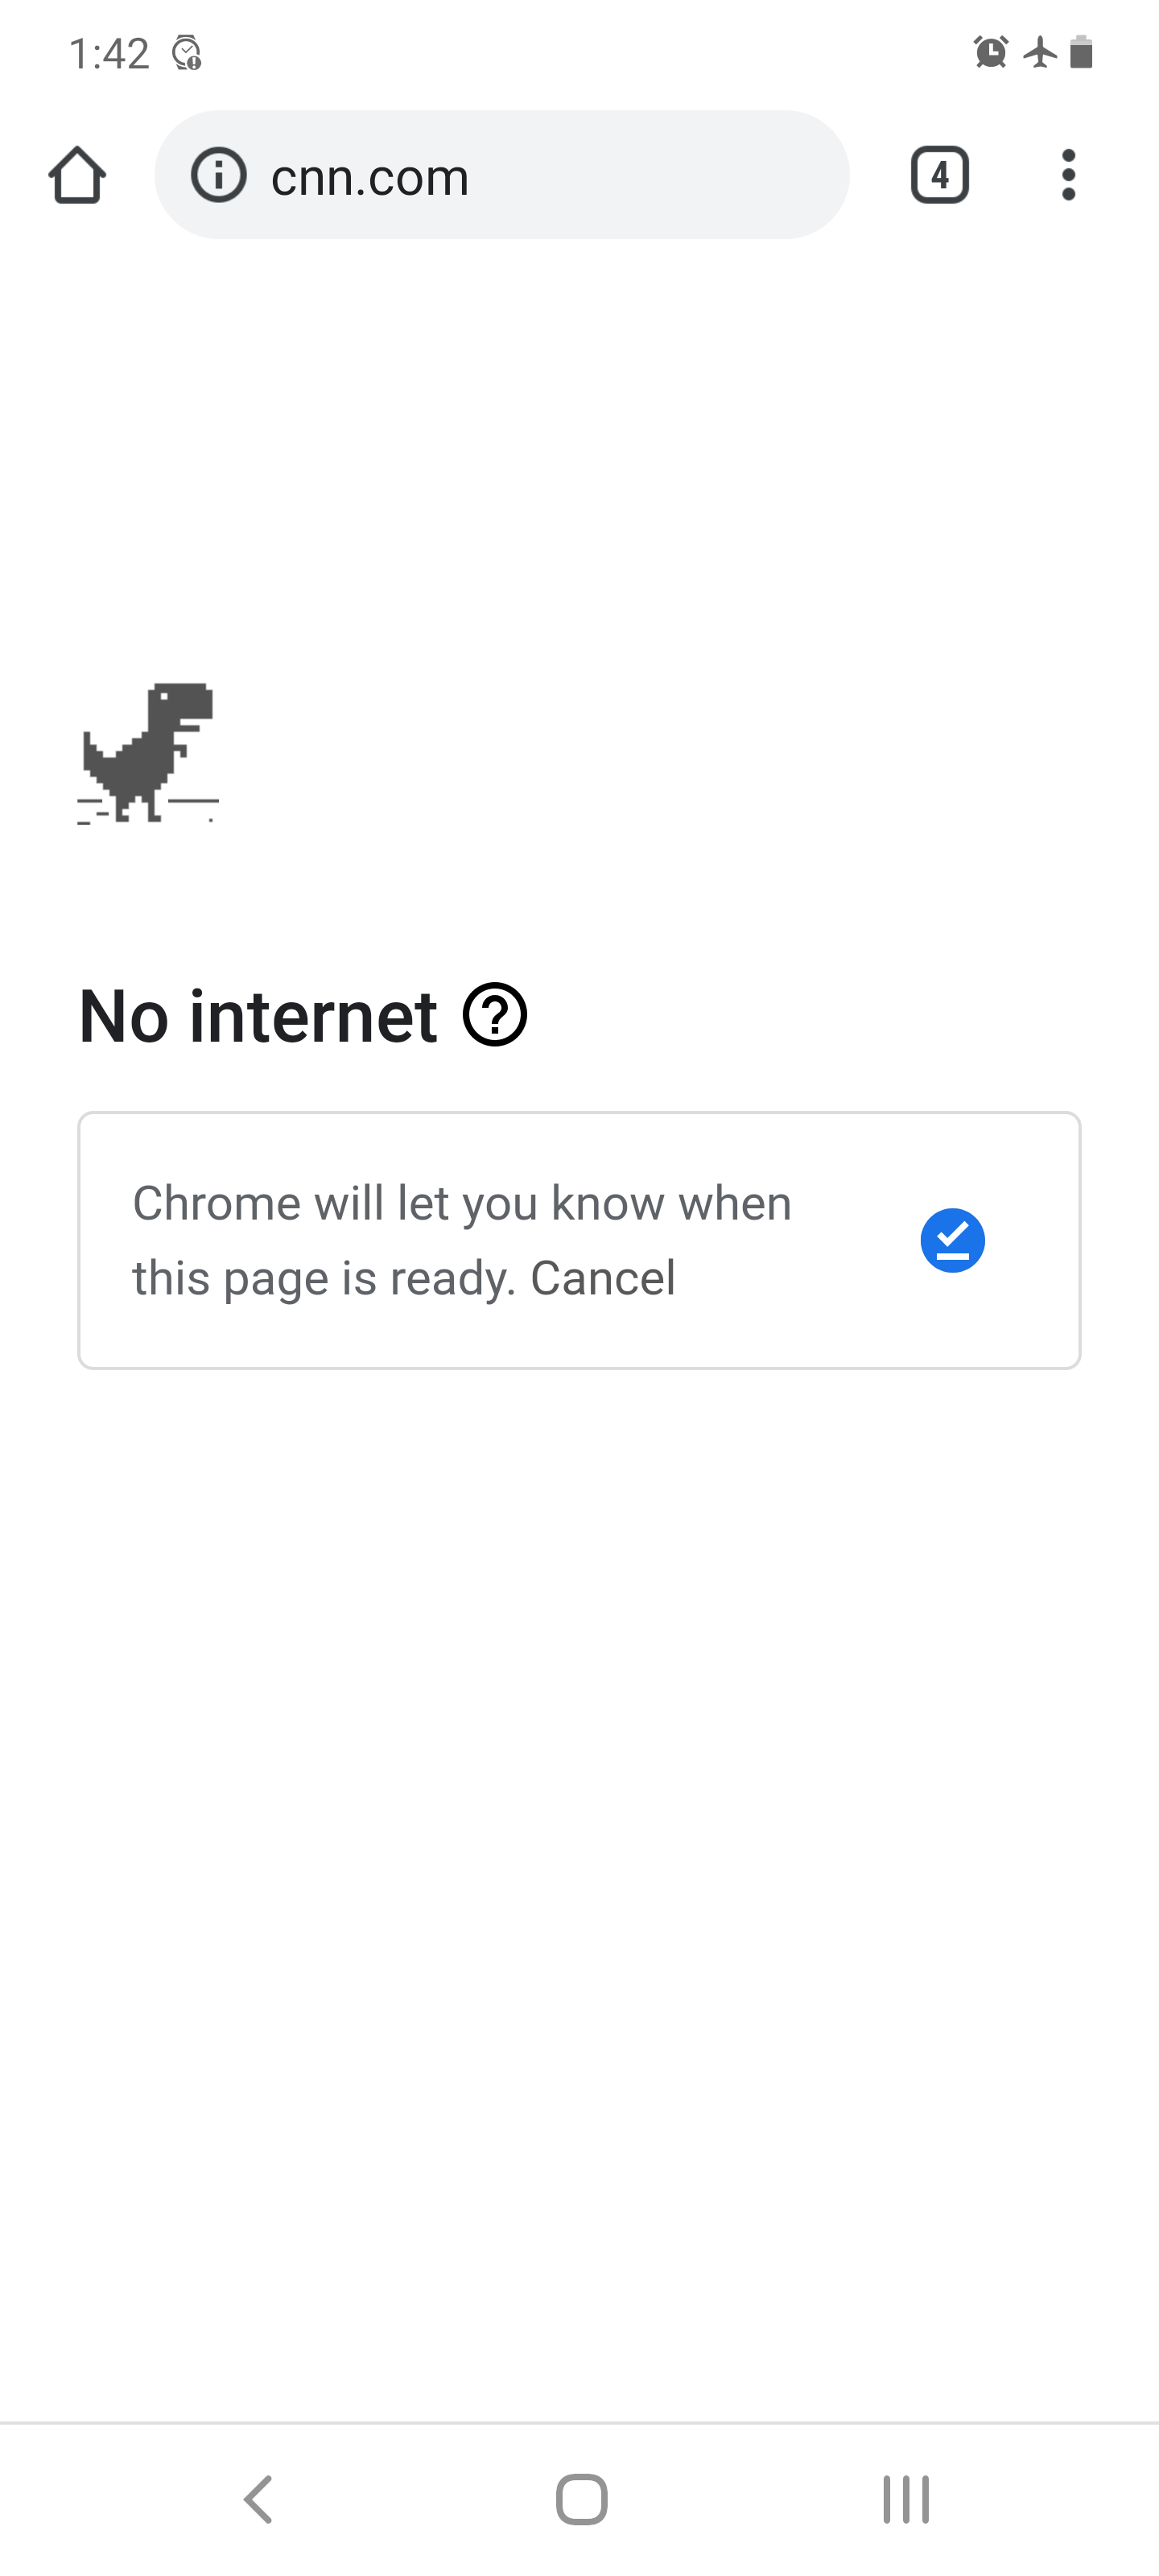 The no internet screen in the Google Chrome mobile app